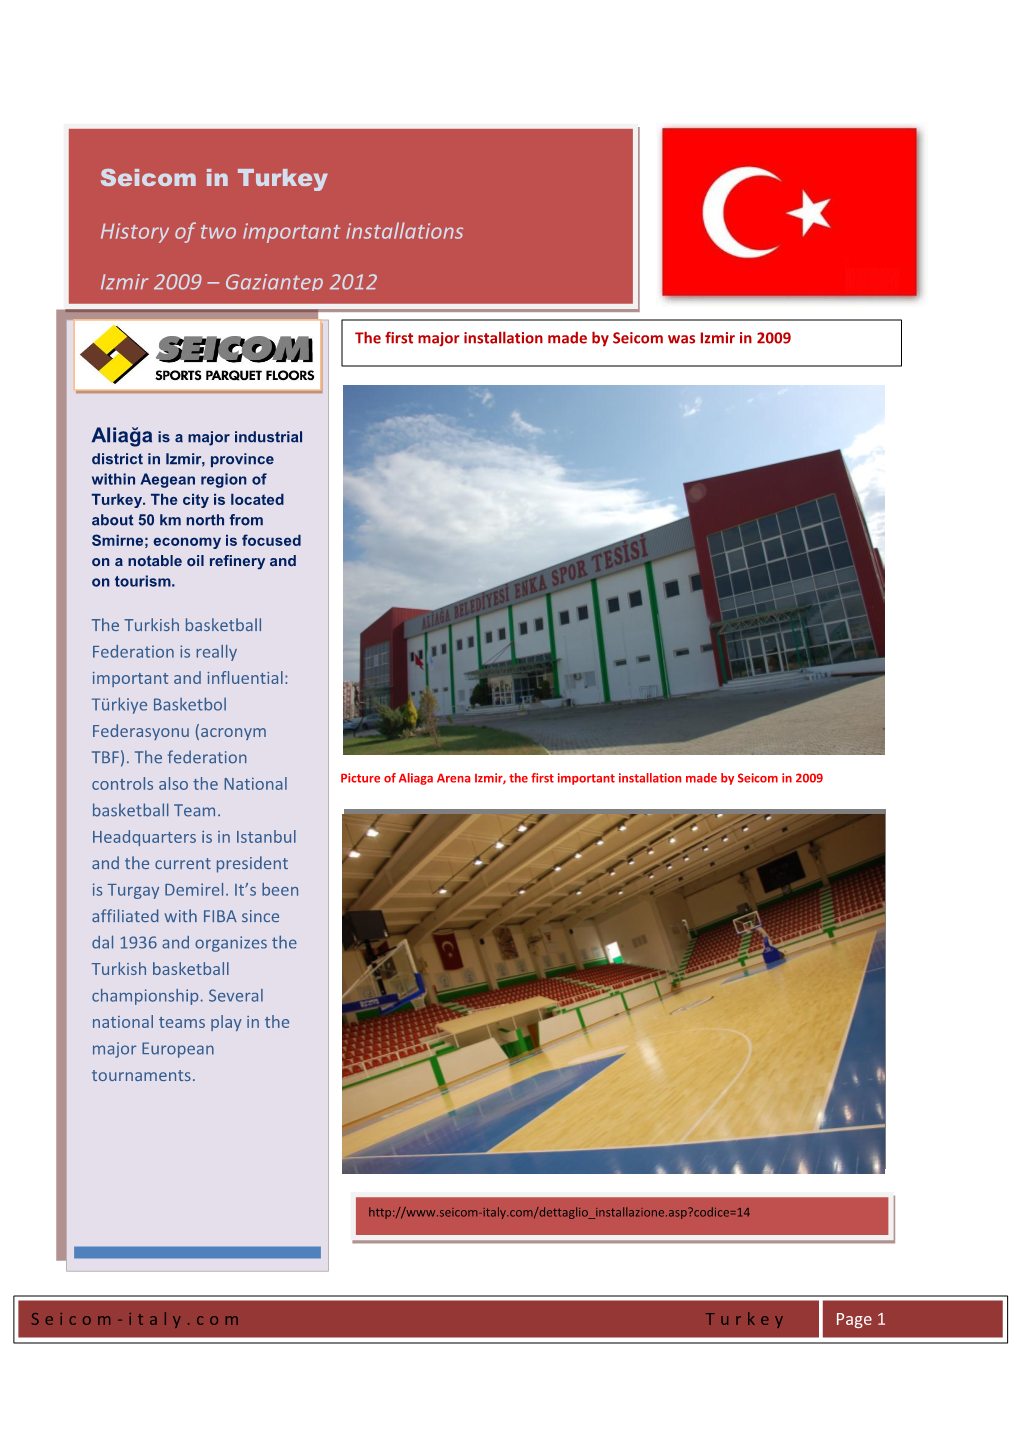 Seicom in Turkey History of Two Important Installations